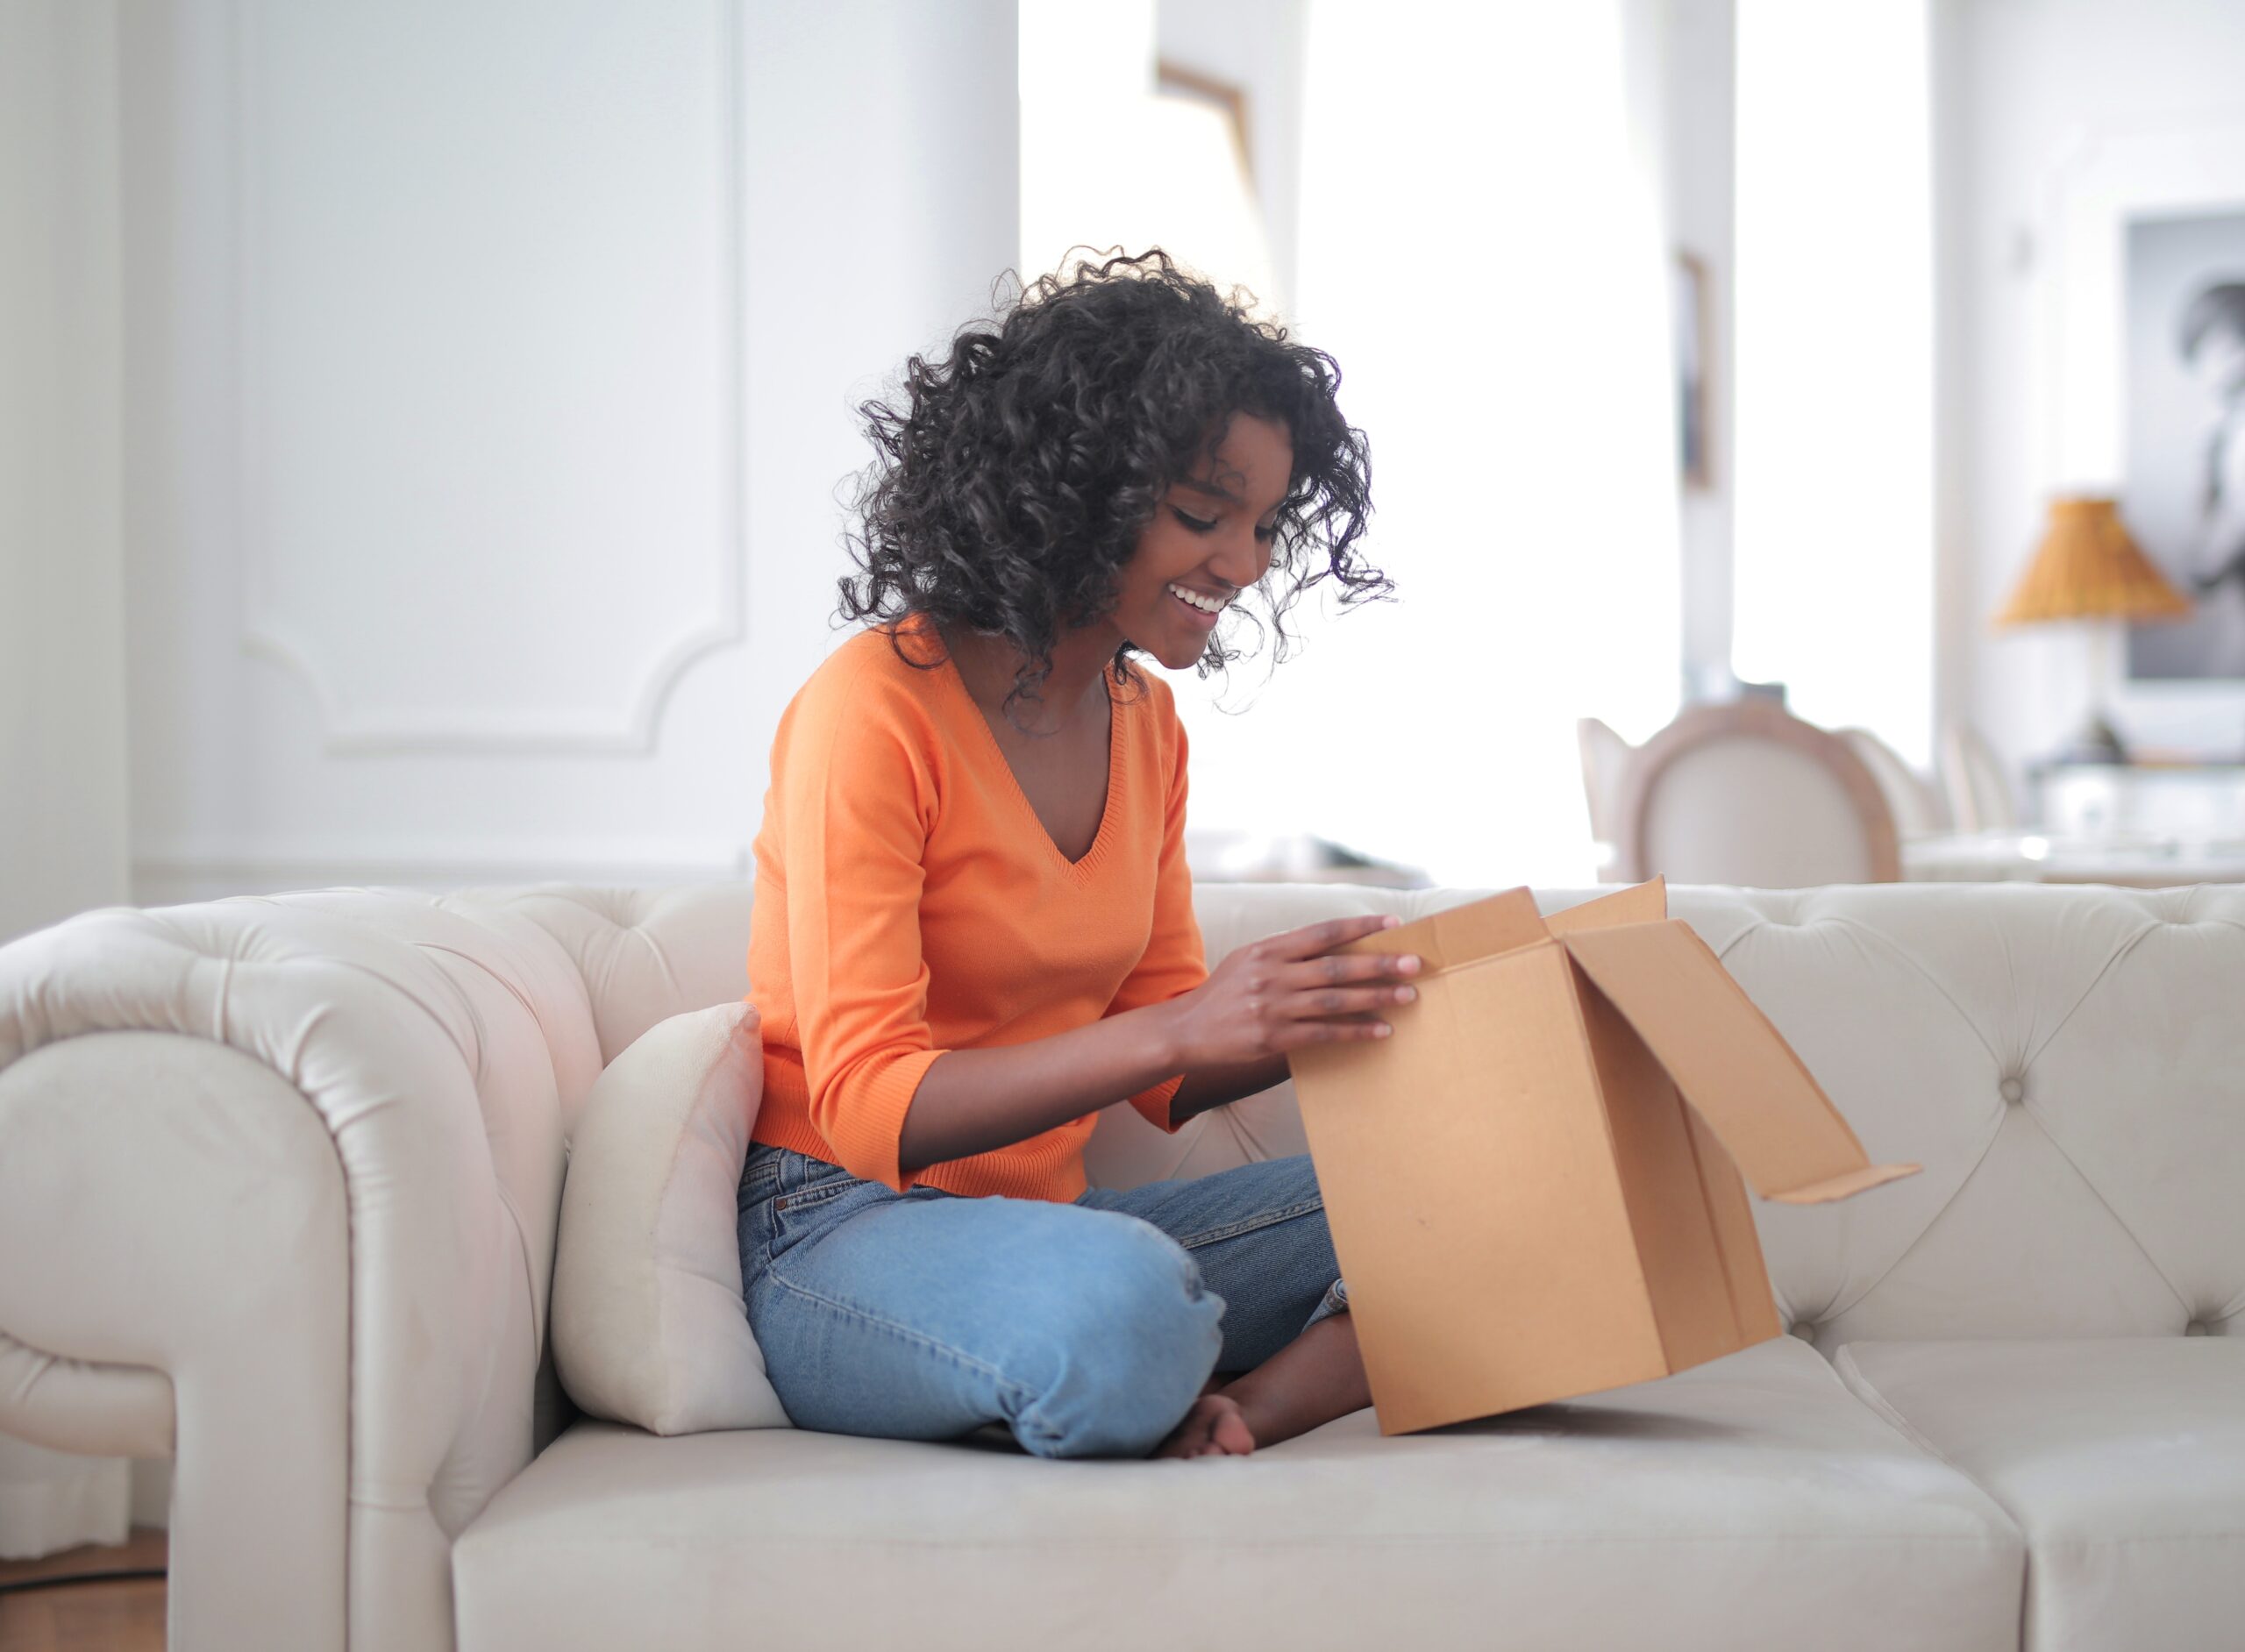 Woman excitedly opening a delivered package